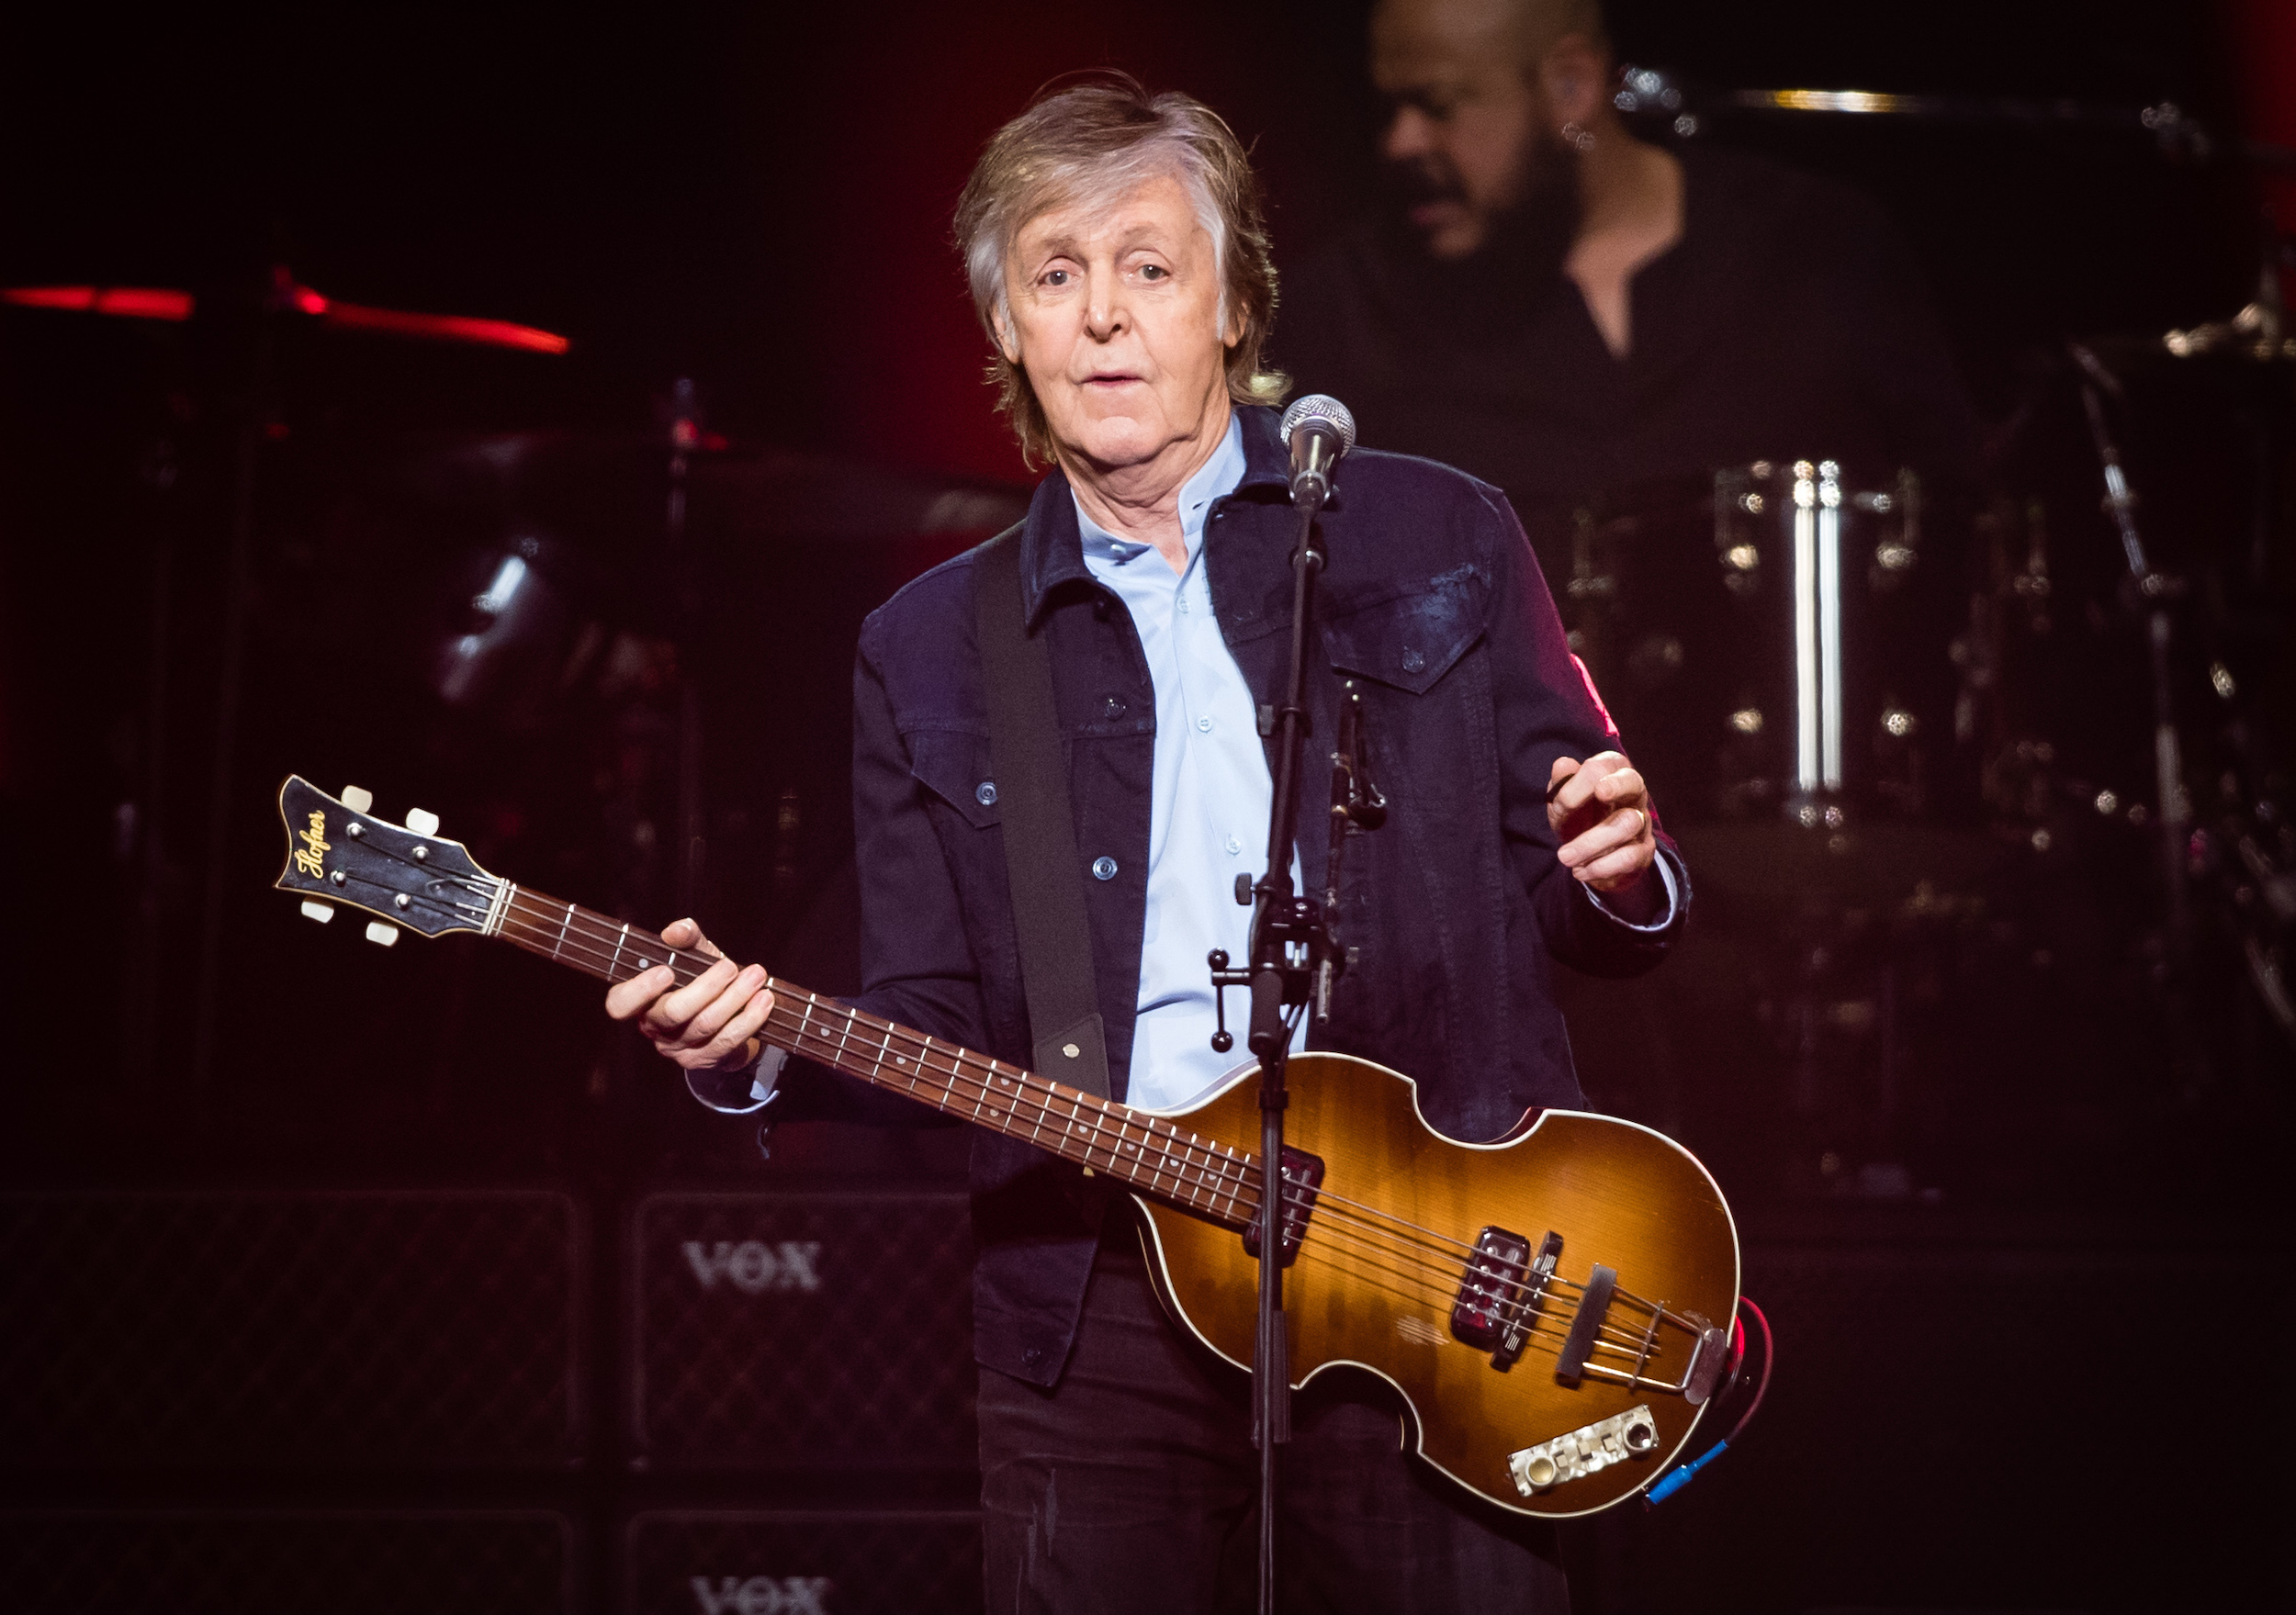 Paul McCartney performs at the O2 Arena in London, England